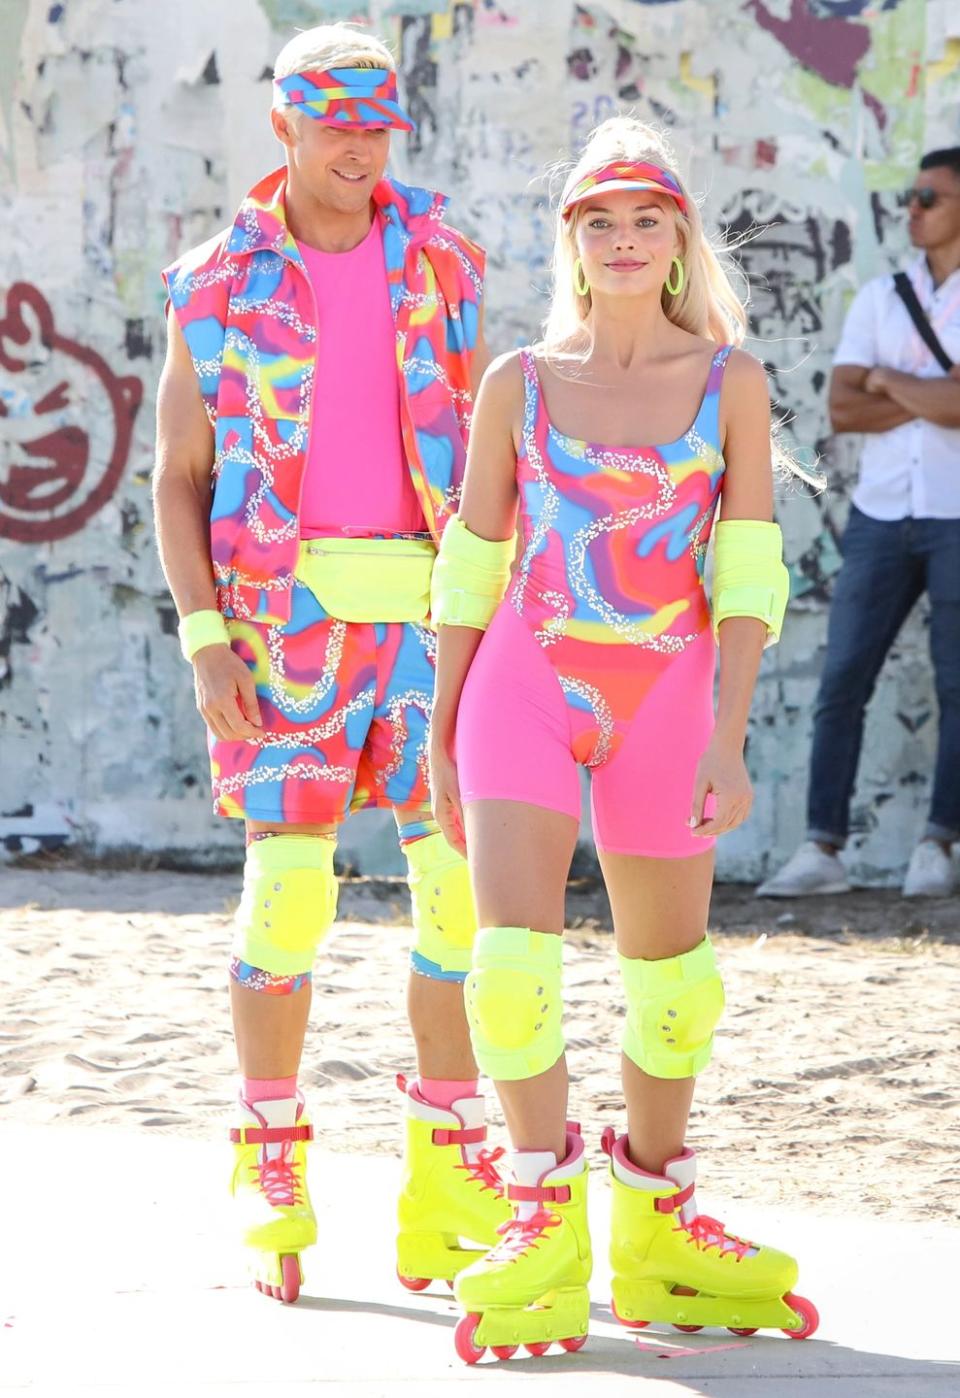 los angeles, ca june 28 margot robbie and ryan gosling are seen rollerblading on the set of barbie on june 28, 2022 in los angeles, california photo by megagc images